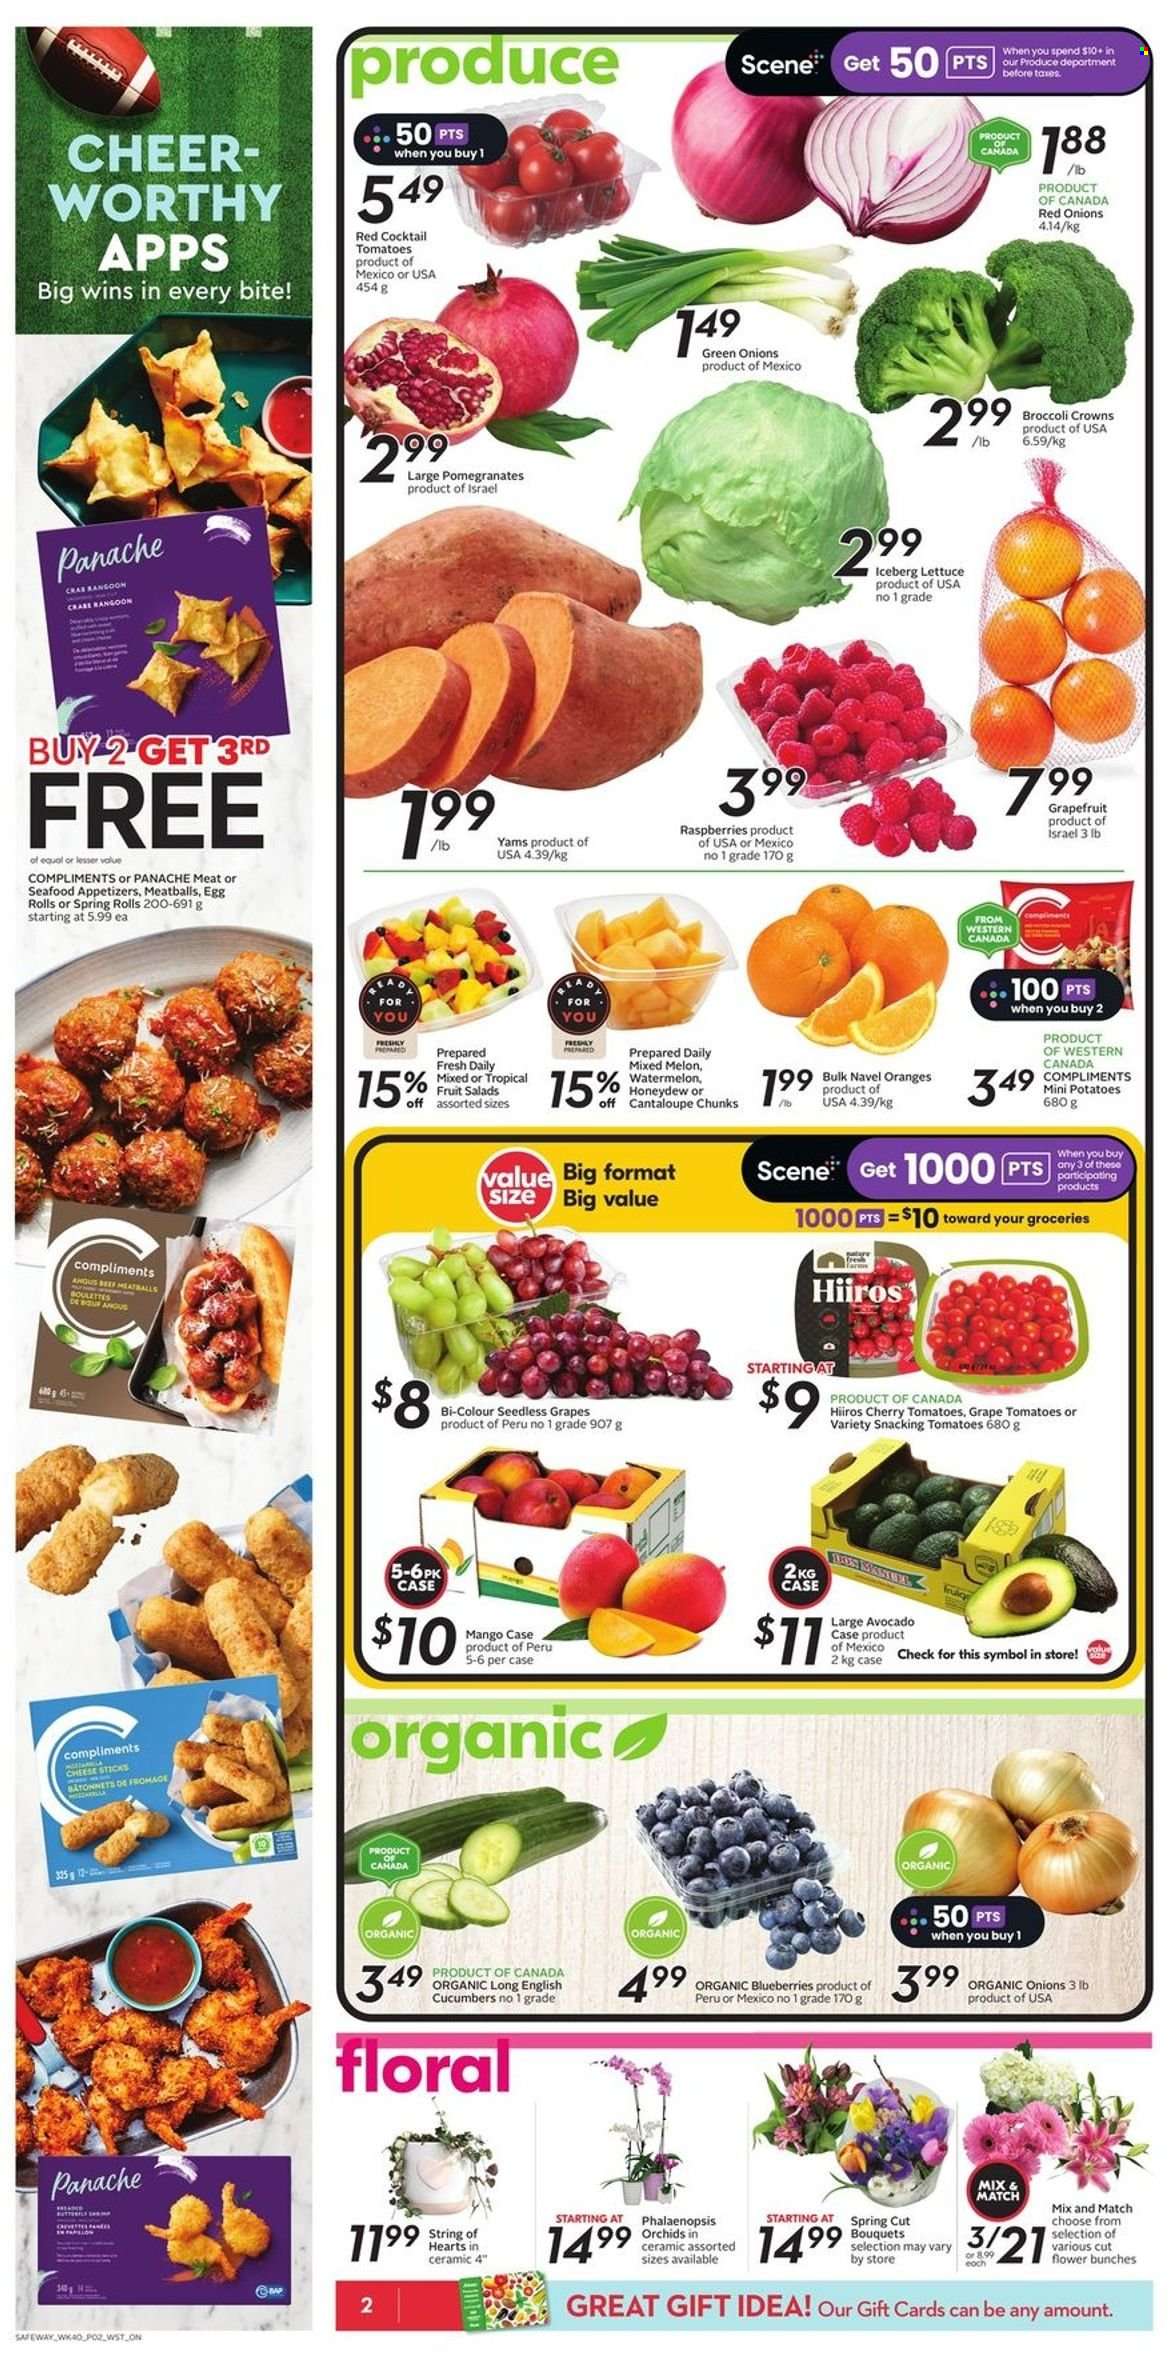 thumbnail - Safeway Flyer - February 02, 2023 - February 08, 2023 - Sales products - cantaloupe, cucumber, red onions, potatoes, lettuce, green onion, avocado, blueberries, grapefruits, seedless grapes, watermelon, honeydew, cherries, oranges, melons, pomegranate, navel oranges, seafood, crab, meatballs, egg rolls, spring rolls, cheese, cheese sticks, beef meat, bunches, bouquet. Page 3.